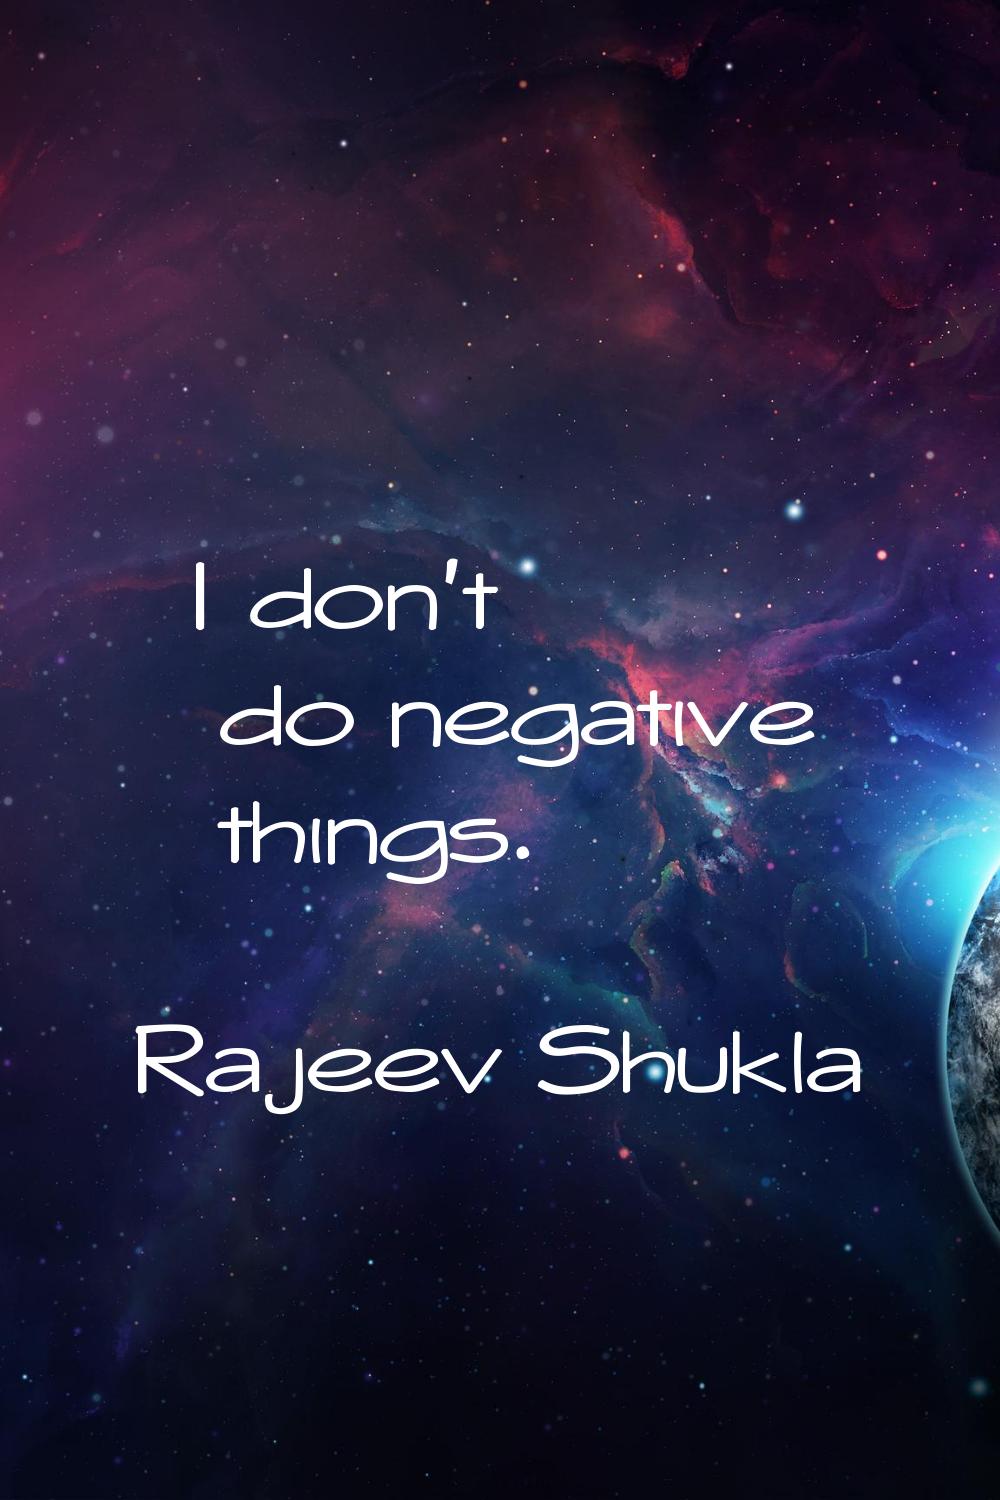 I don't do negative things.